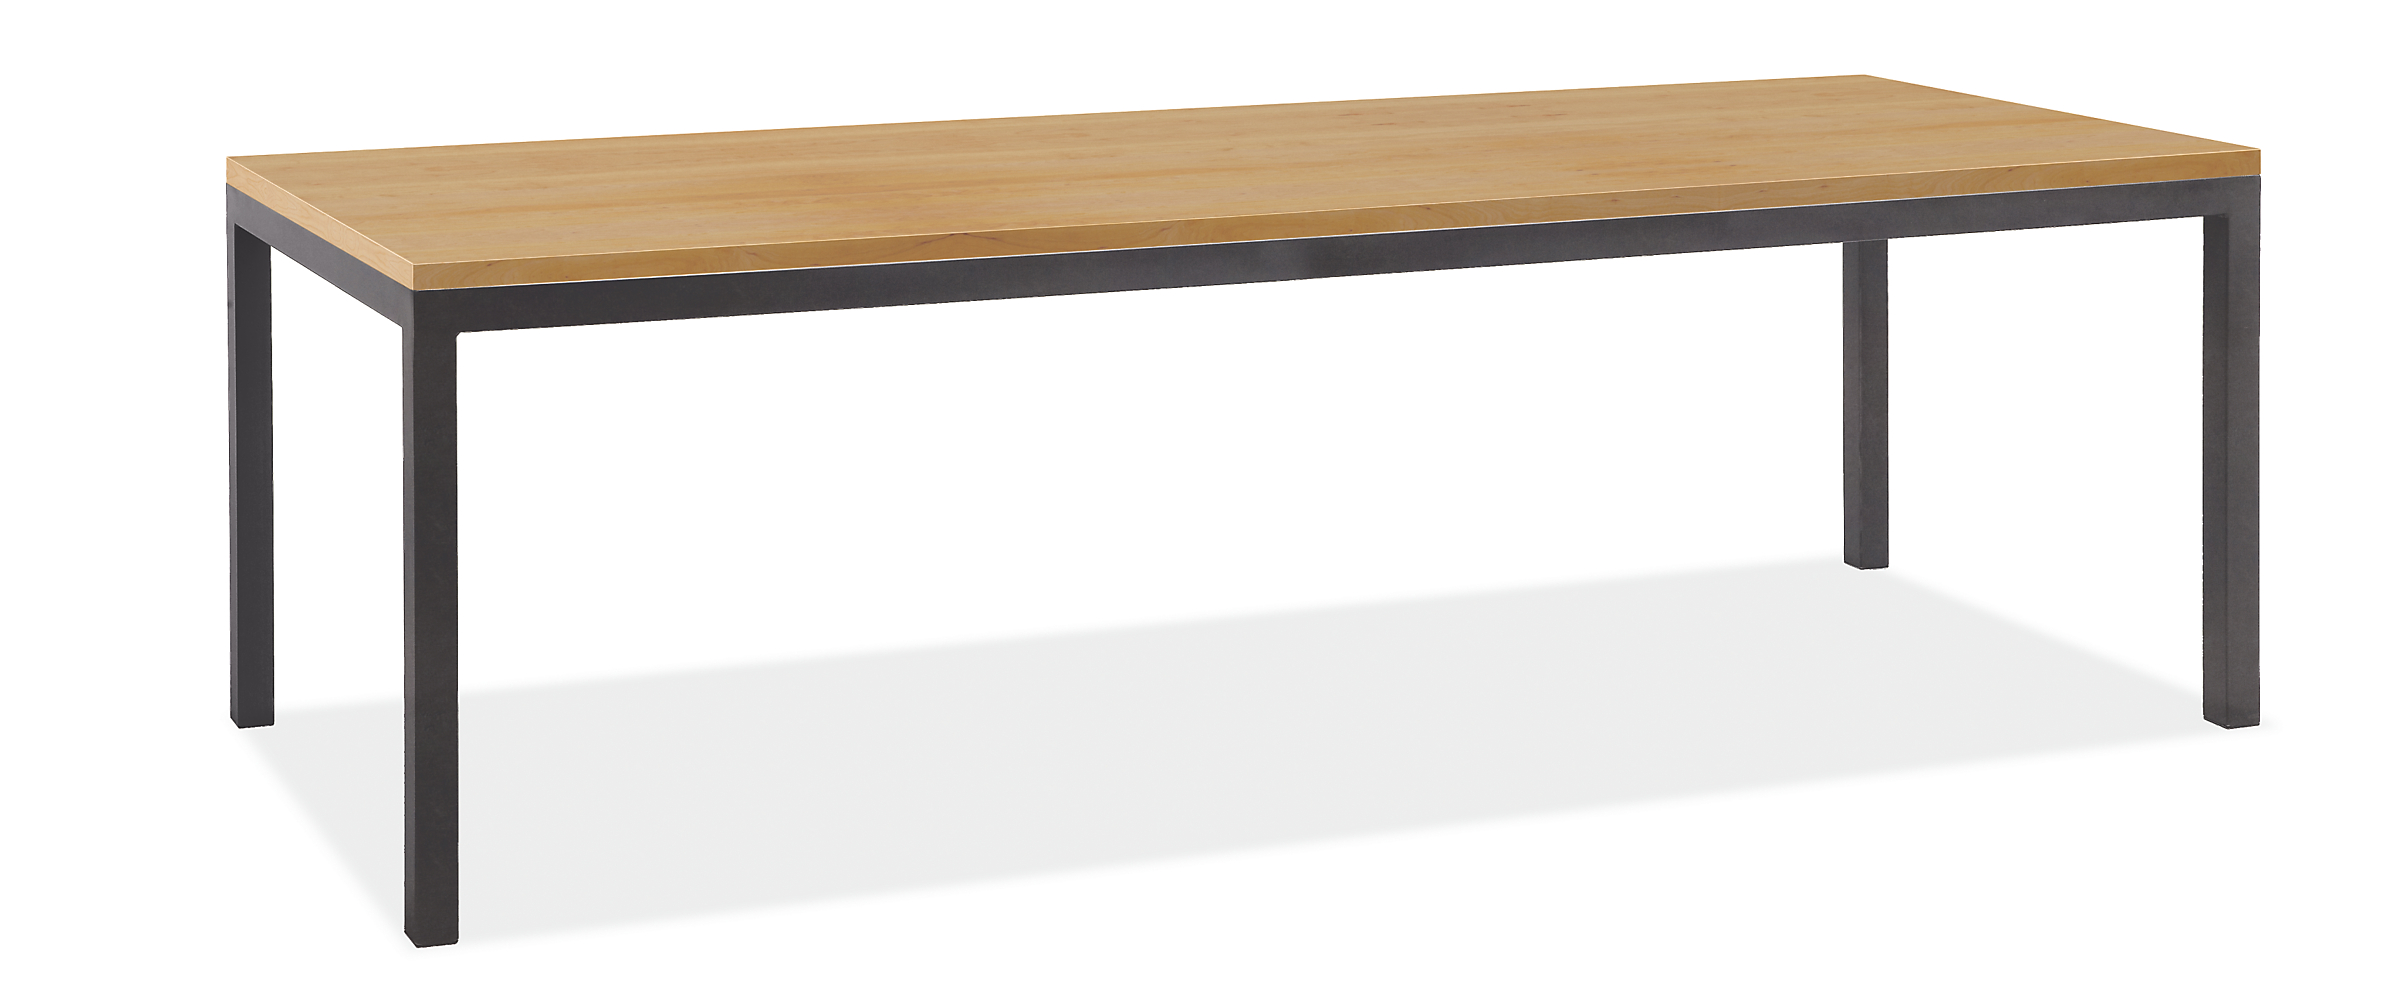 Parsons 96w 48d Table with 2" Leg